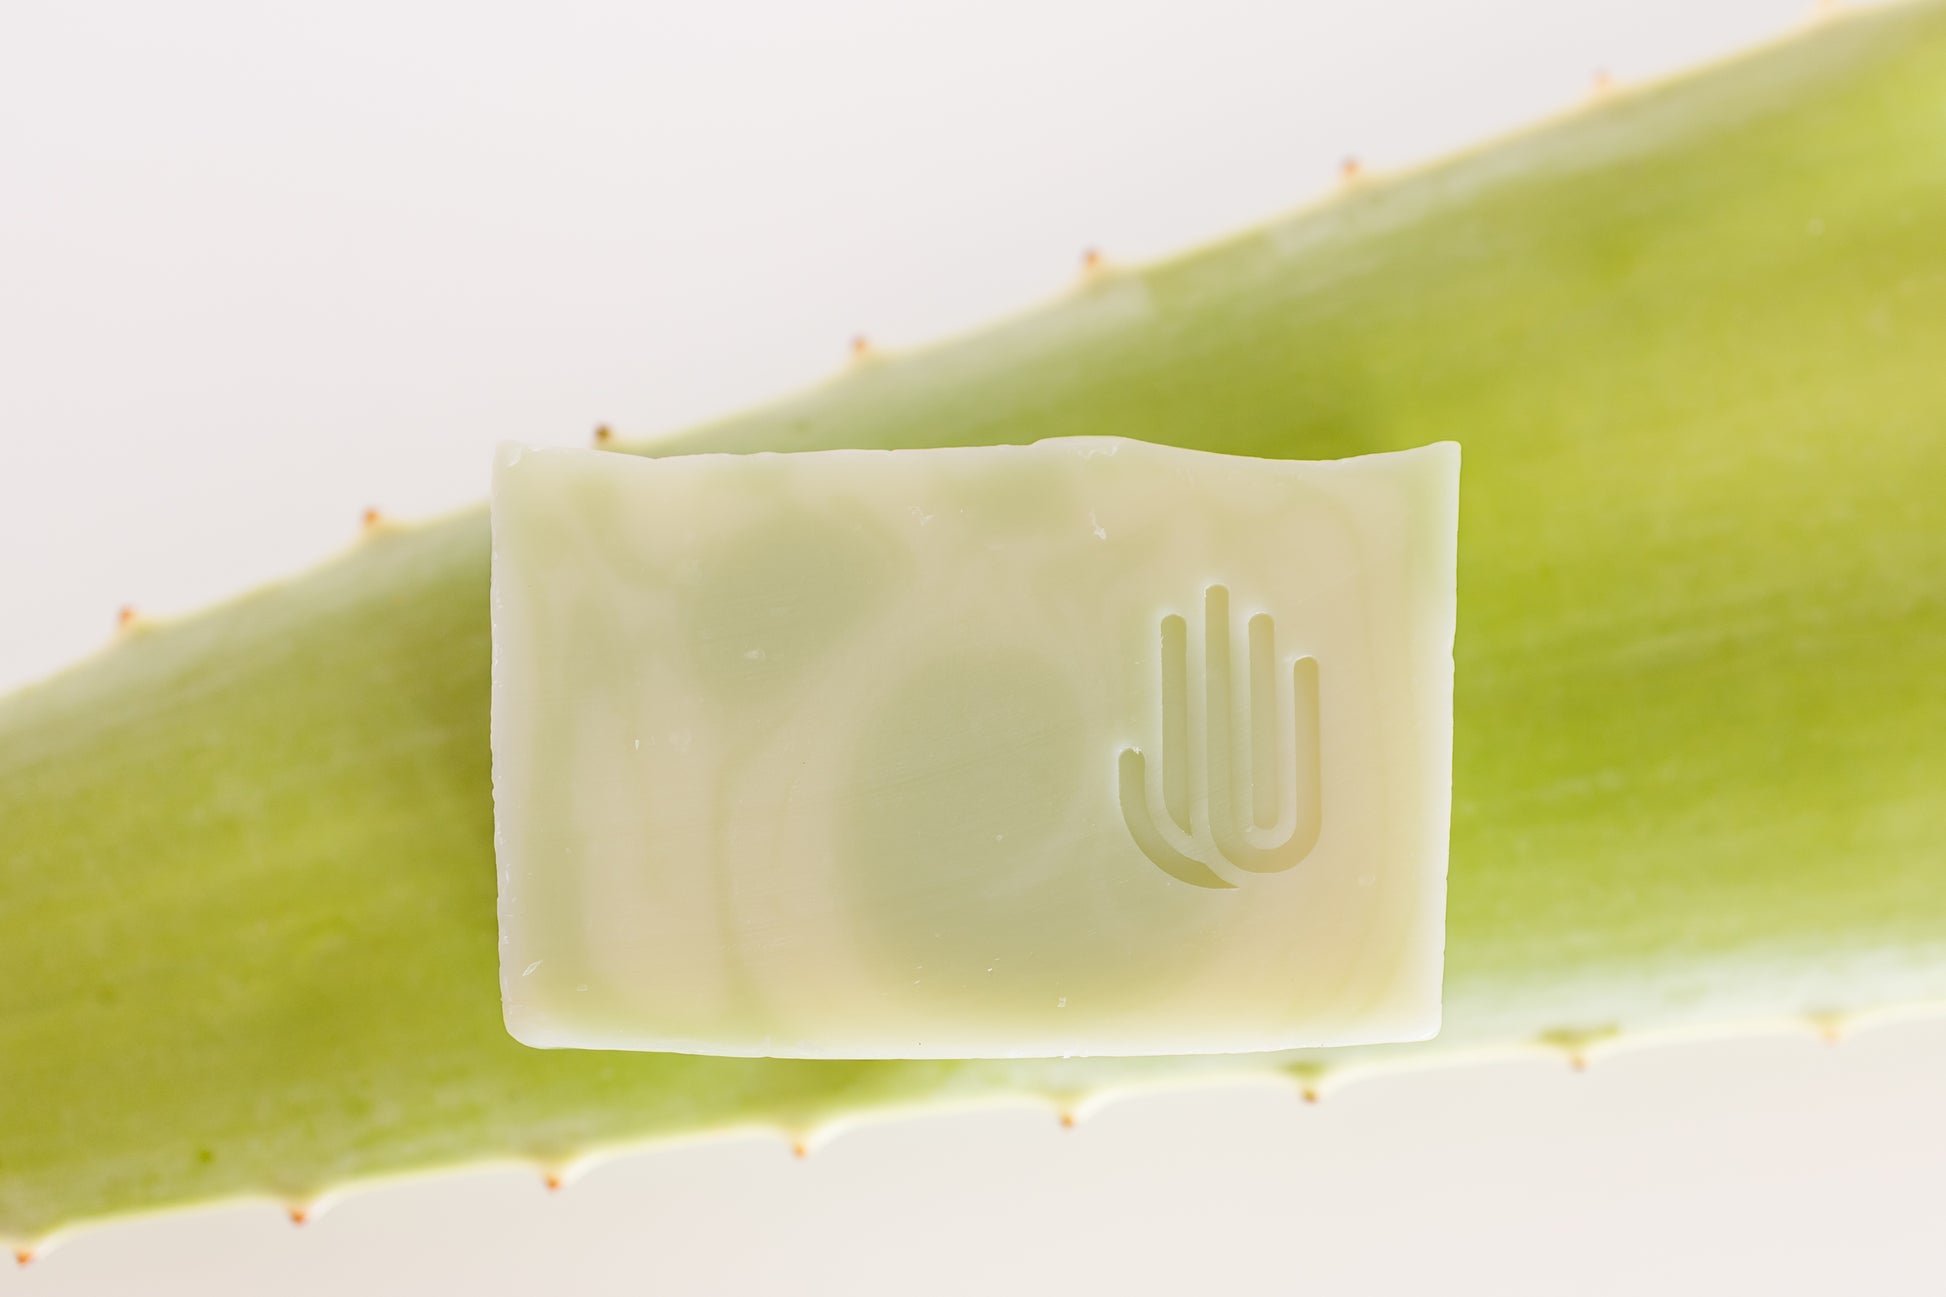 square white and green swirled soap sitting on a real aloe leaf placed on a white background